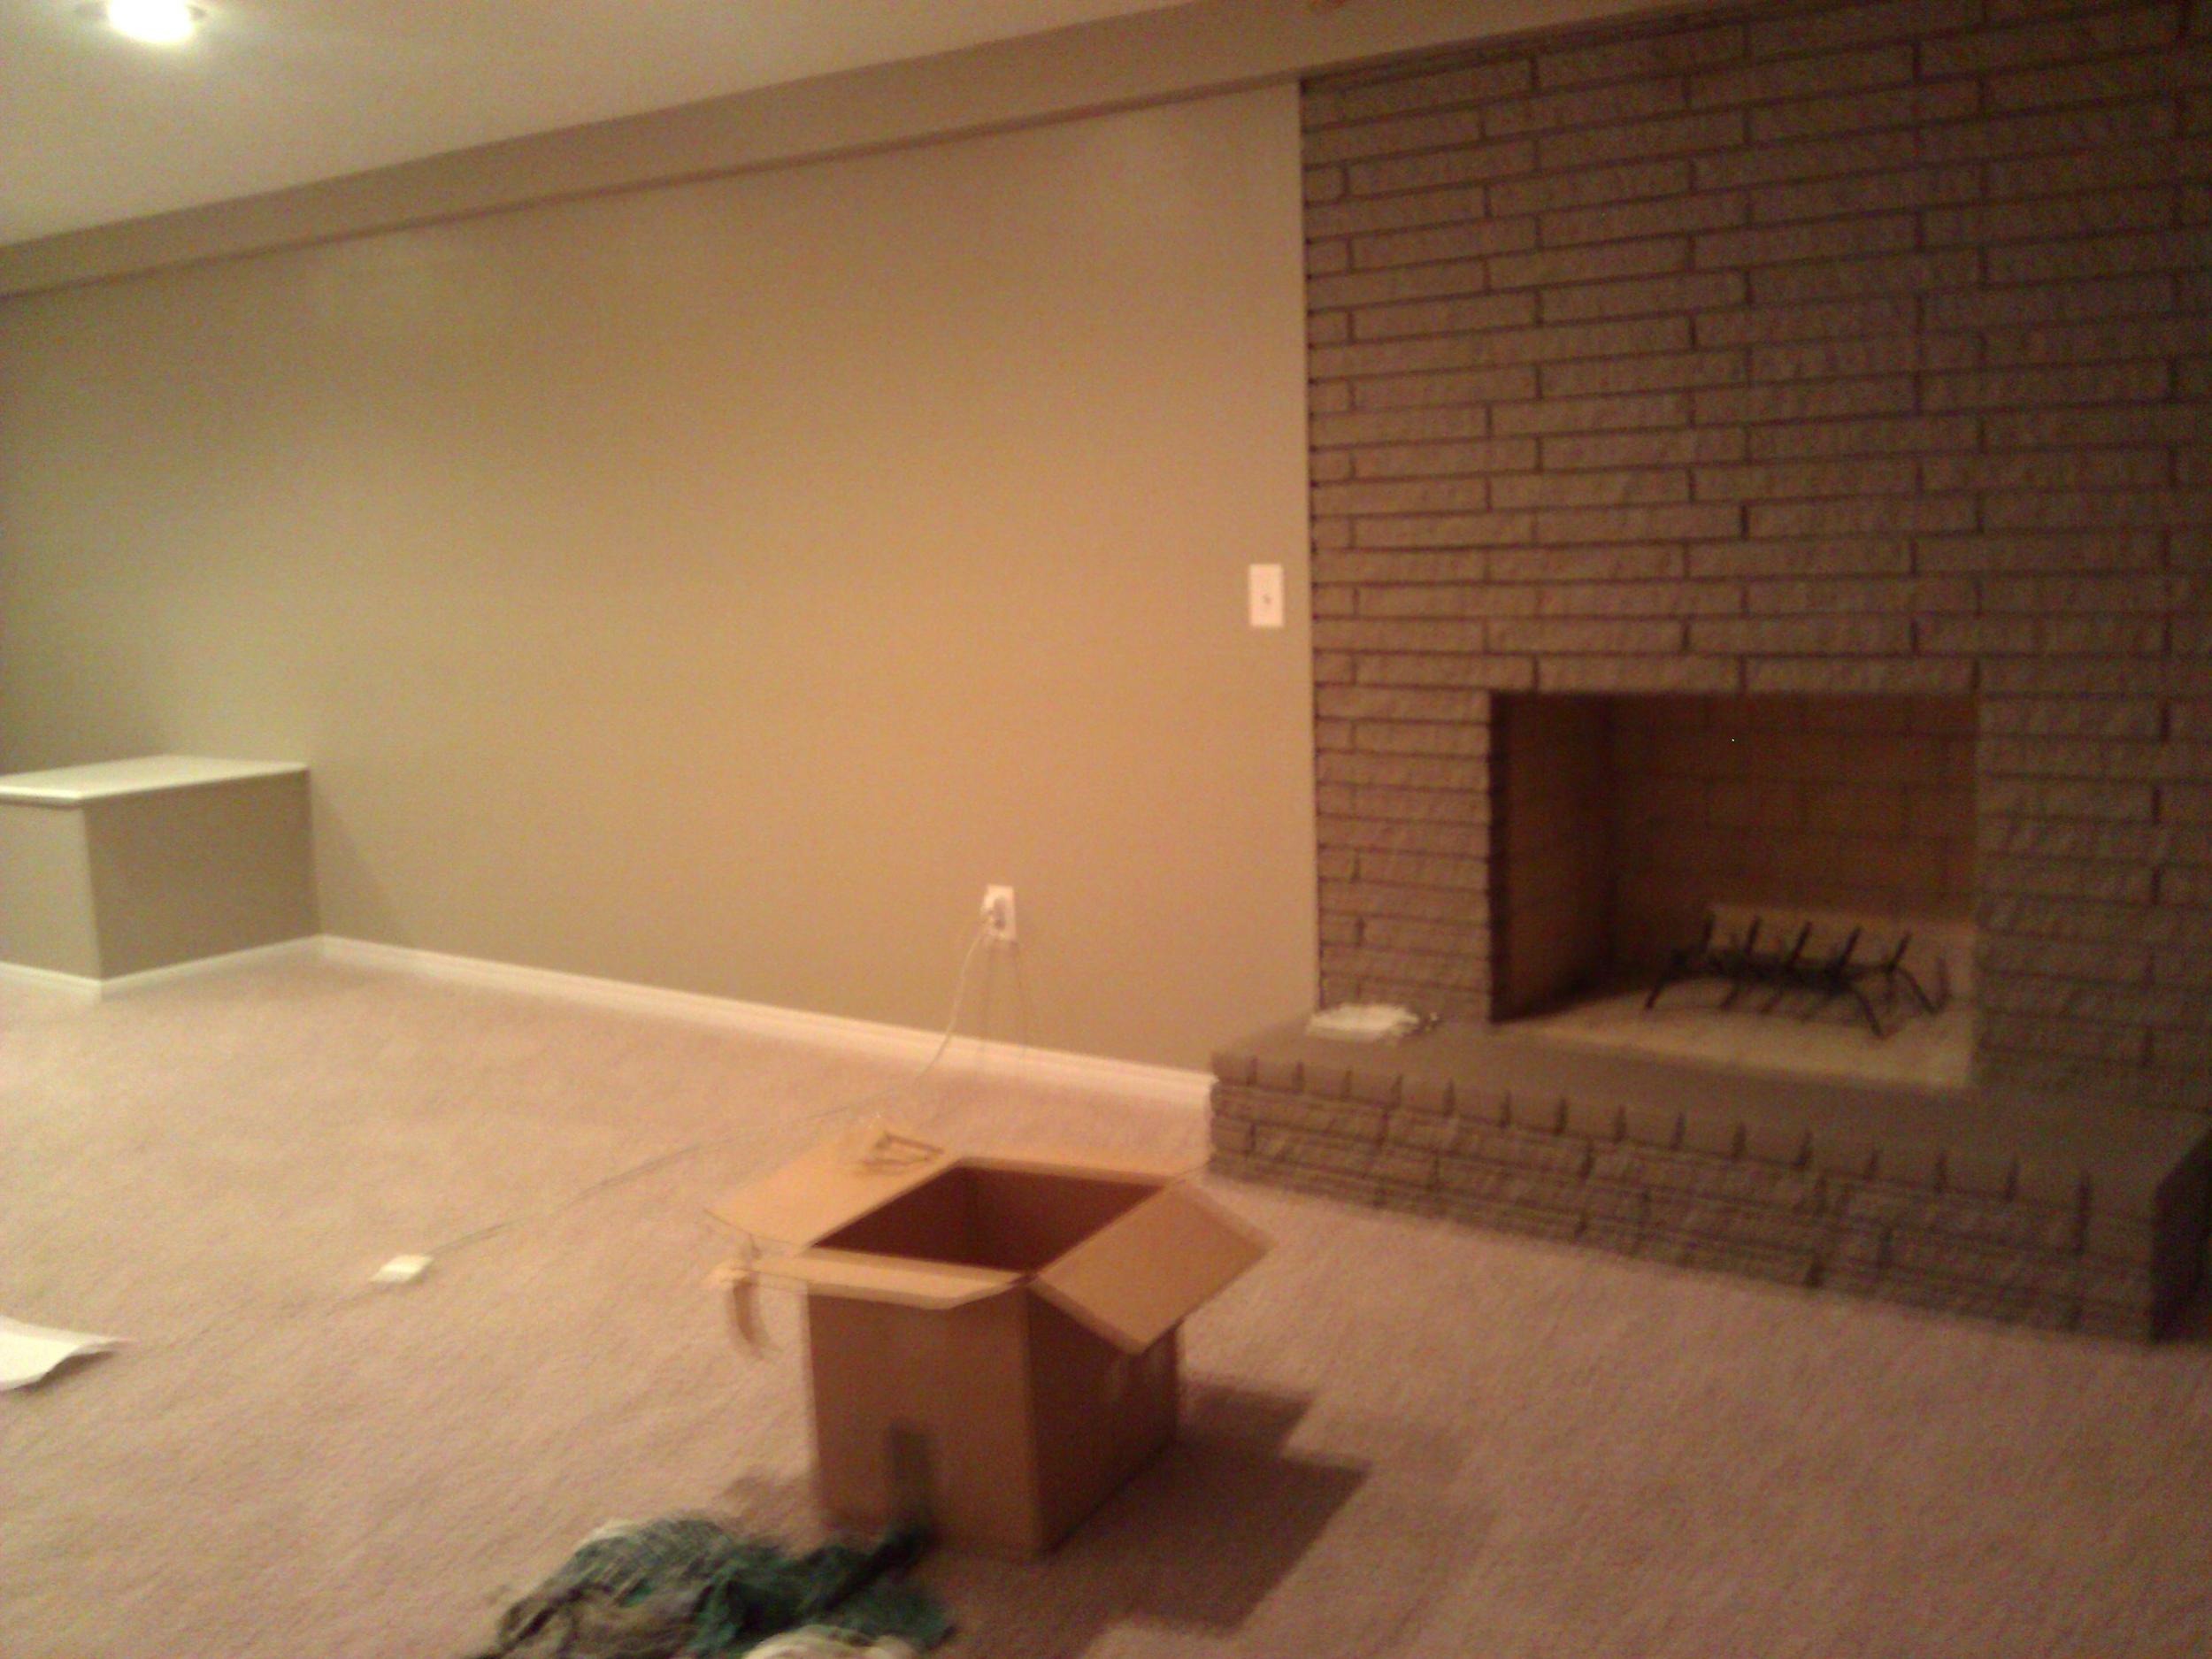 The basement hearth, on the right as you enter the basement from the garage.